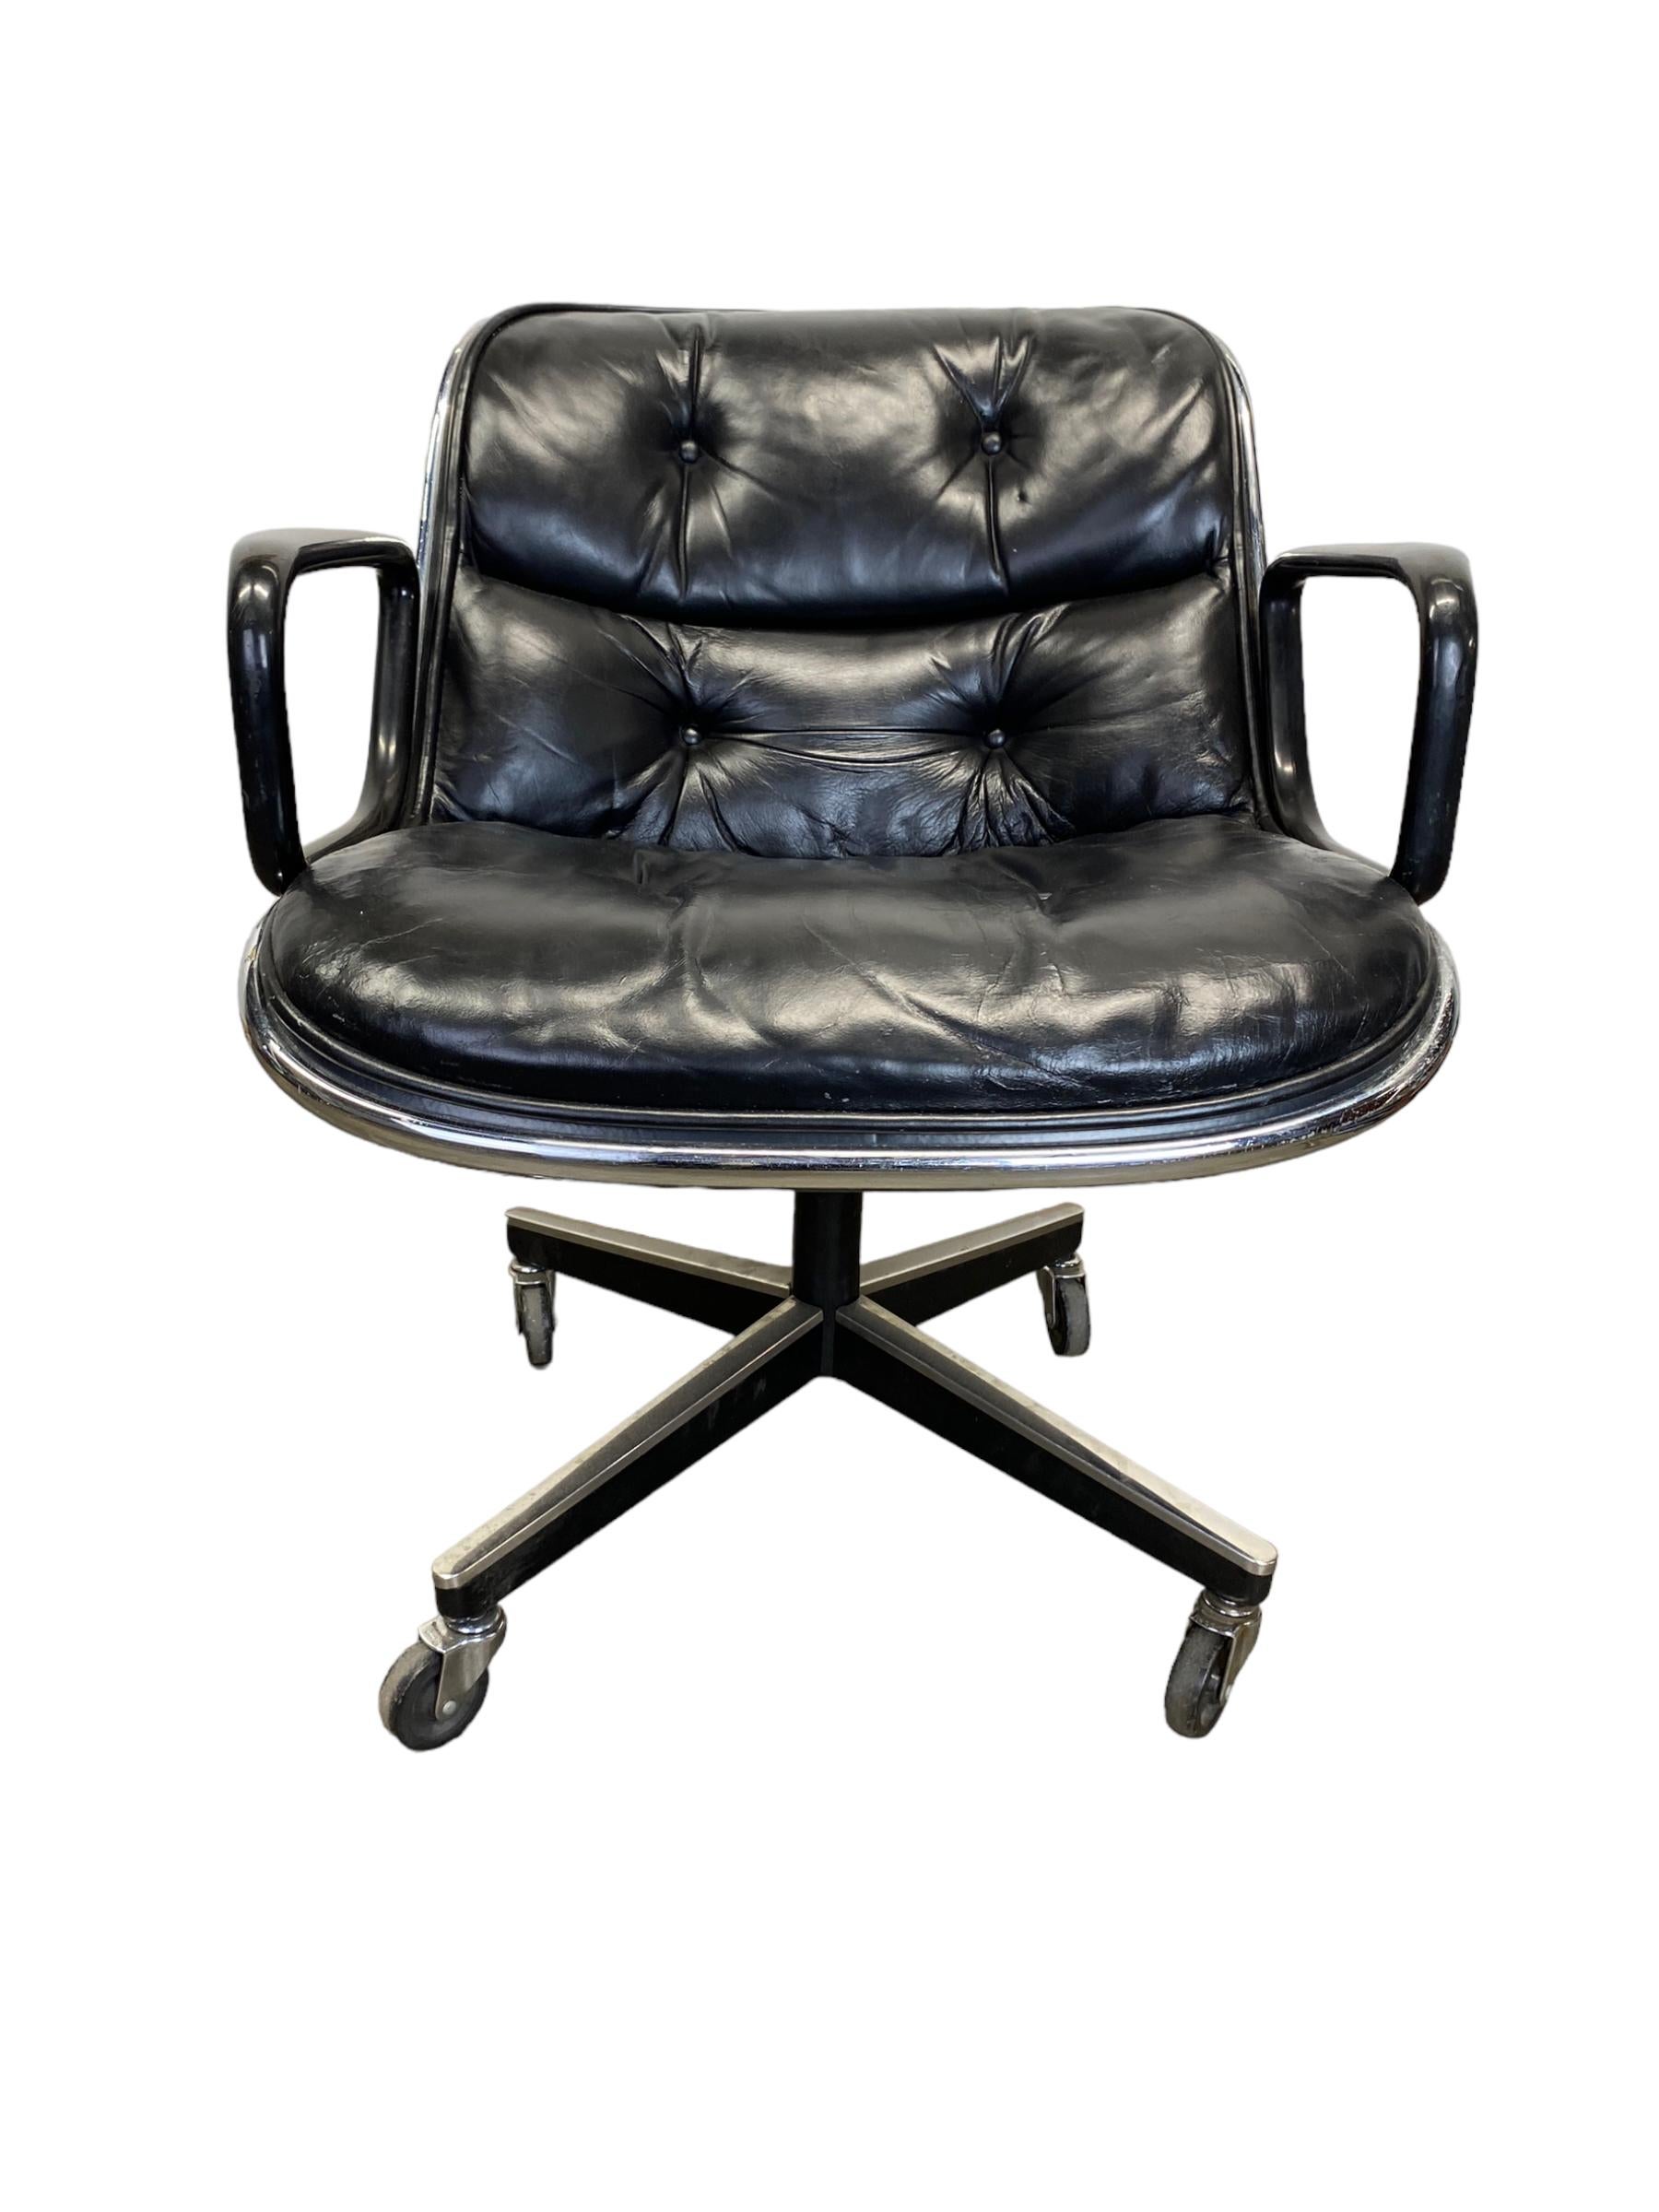 Vintage Charles Pollock for Knoll executive chair in black blue leather. This executive desk chair has a swivel base with manual adjustable height. Base with all wheels in working condition. Good vintage condition, wear consistent with age and use.